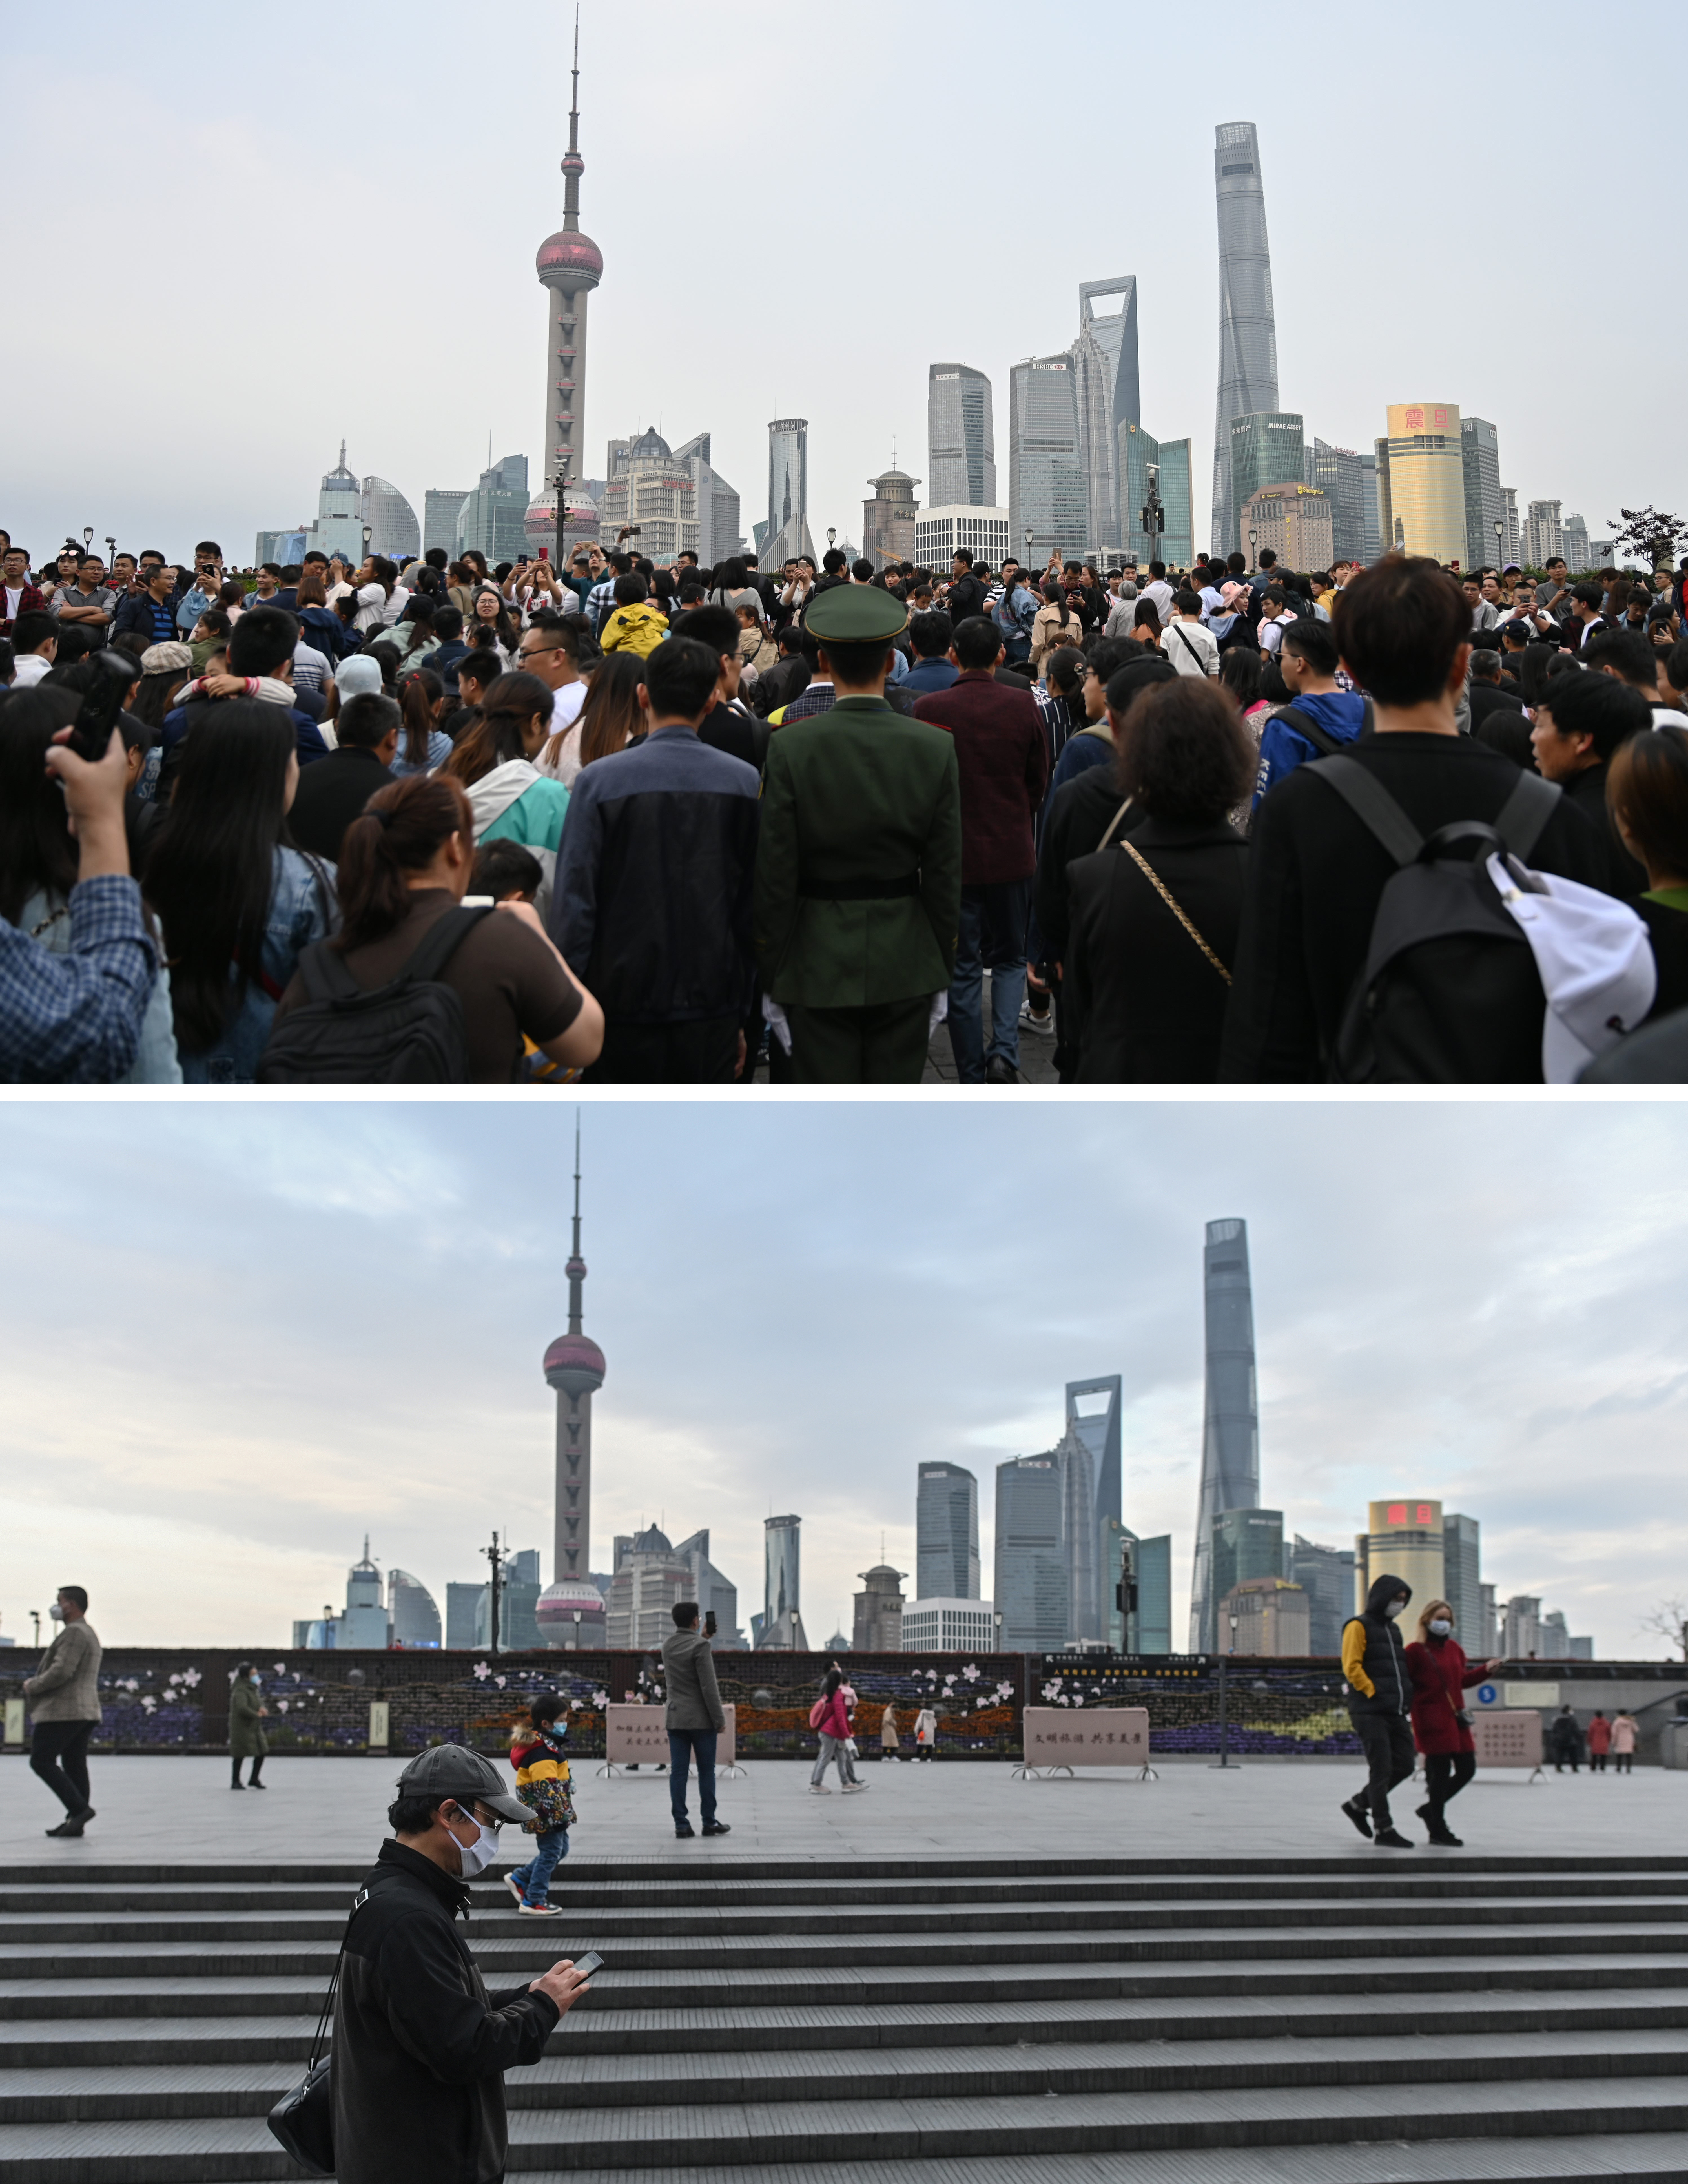 (COMBO) This combination photo created on March 8, 2020 shows people visiting the promenade on the Bund along the Huangpu River during the May Day holiday in Shanghai on May 1, 2019 (top) and people wearing facemasks, amid concerns of the COVID-19 novel coronavirus, along the Bund in Shanghai on March 8, 2020. (Photo by Hector RETAMAL / AFP) / To go with a package of 14 combination pictures, search on www.afpforum.com: 'ASIA-CHINA-HEALTH-VIRUS-COMBO'